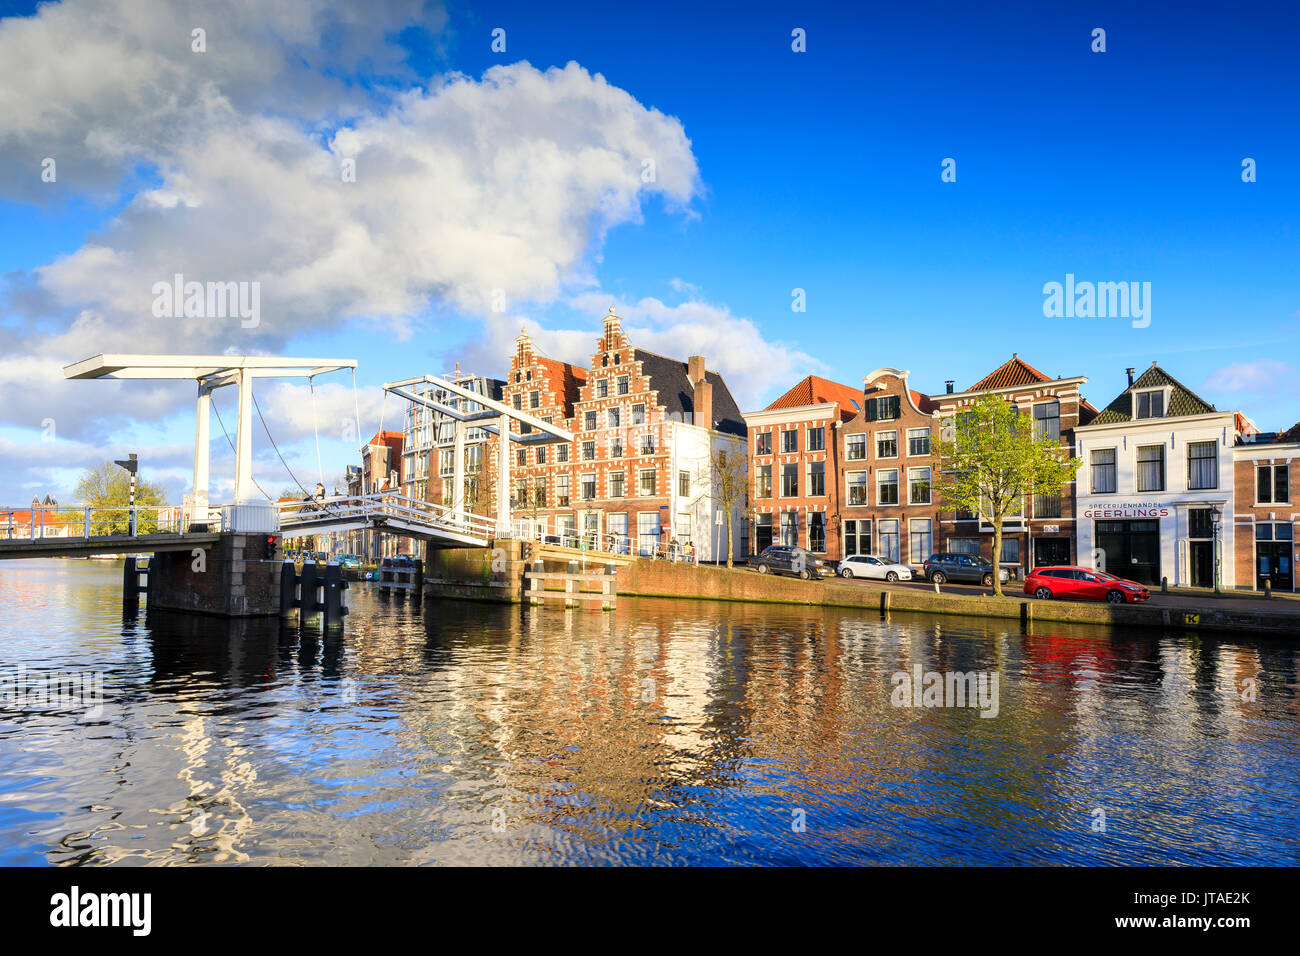 Blue sky and clouds on typical houses reflected in the canal of the River Spaarne, Haarlem, North Holland, The Netherlands Stock Photo